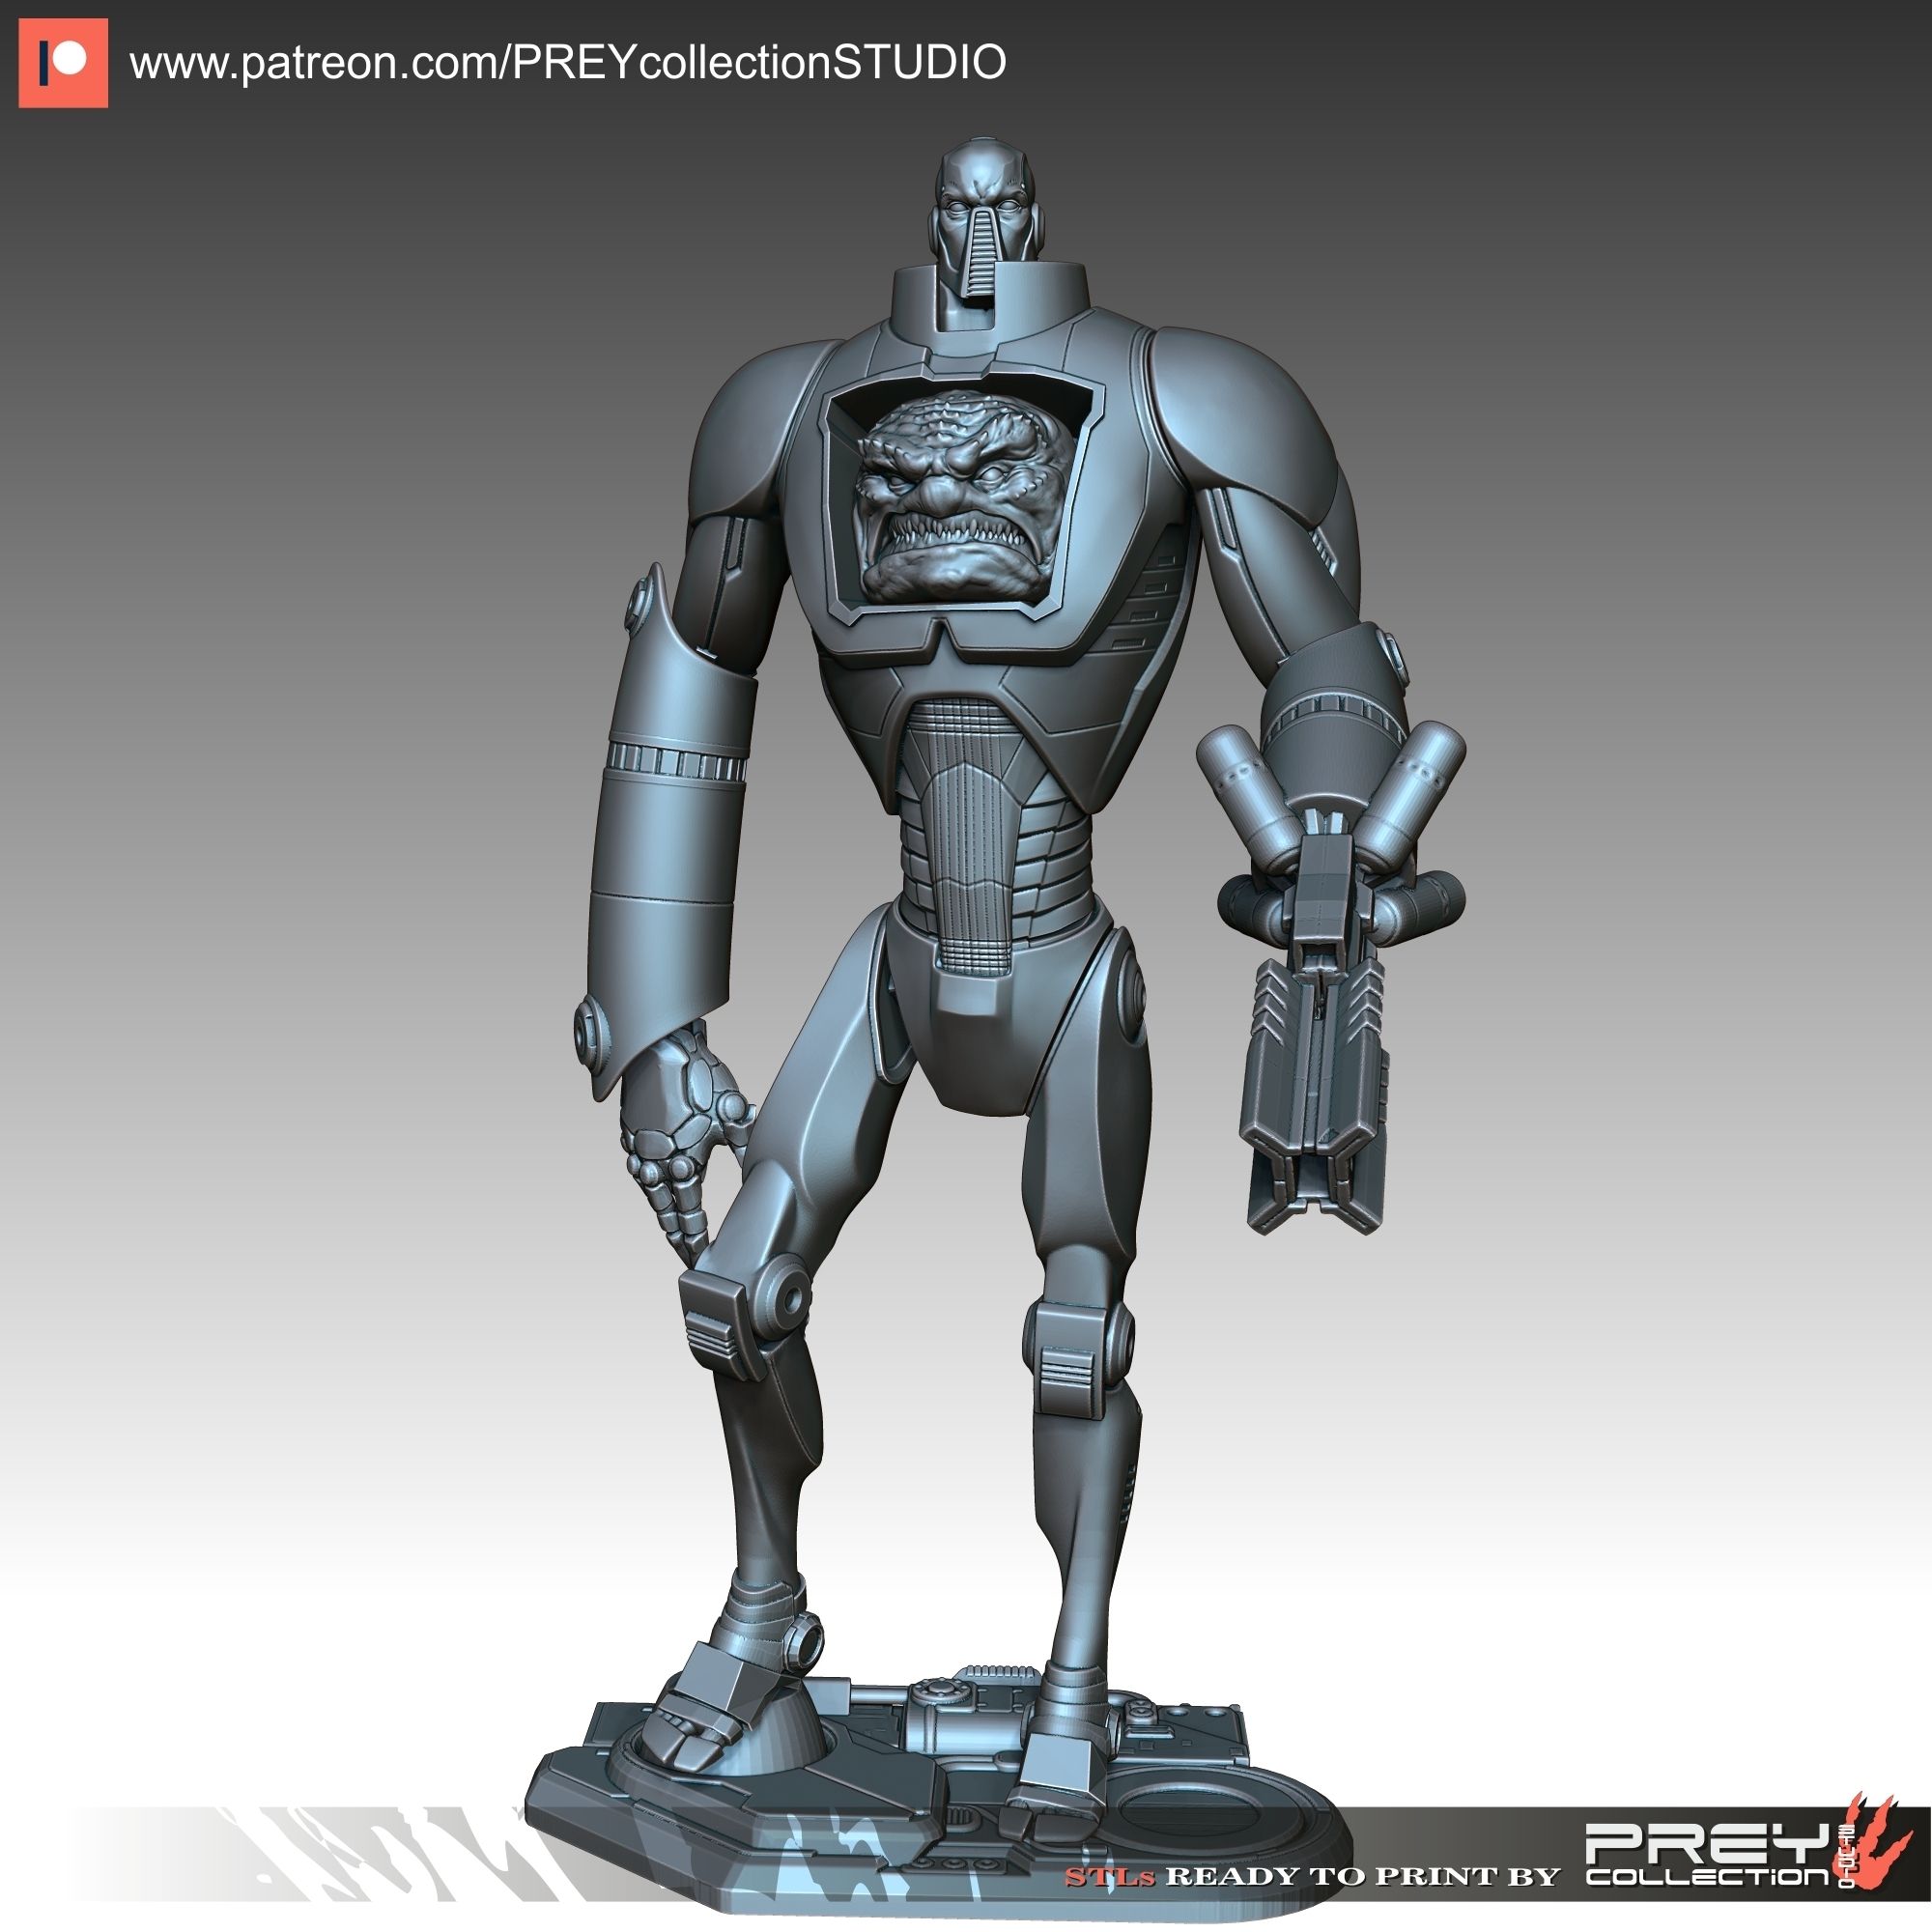 157.jpg 3D file KRANG 1-10 SCALE・Template to download and 3D print, PREYcollectionSTUDIO